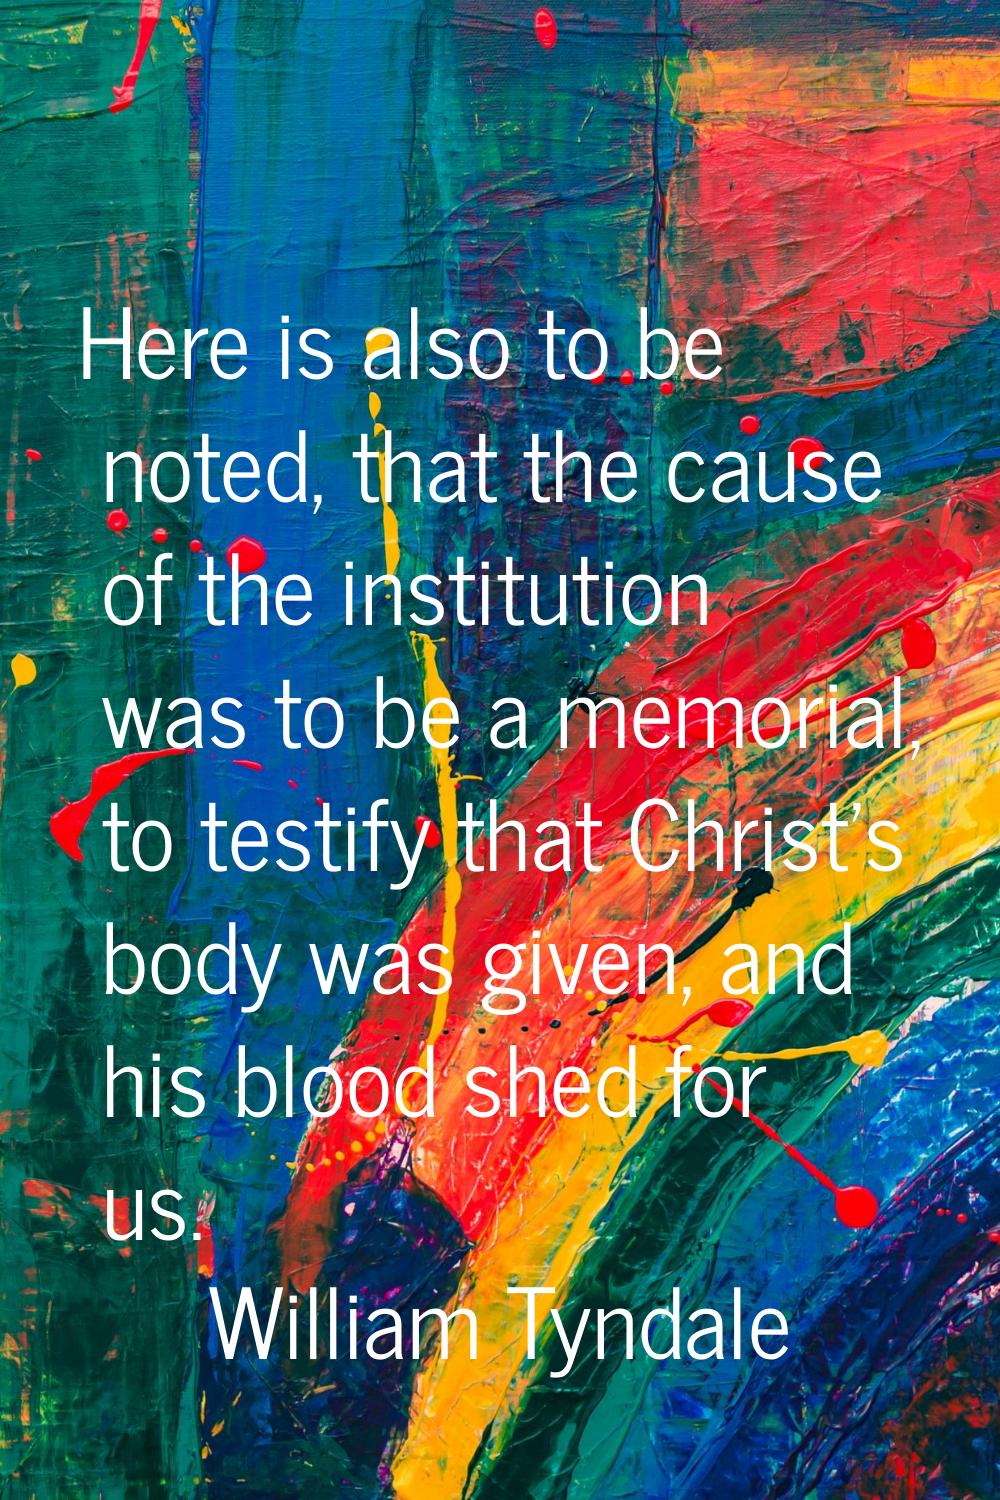 Here is also to be noted, that the cause of the institution was to be a memorial, to testify that C